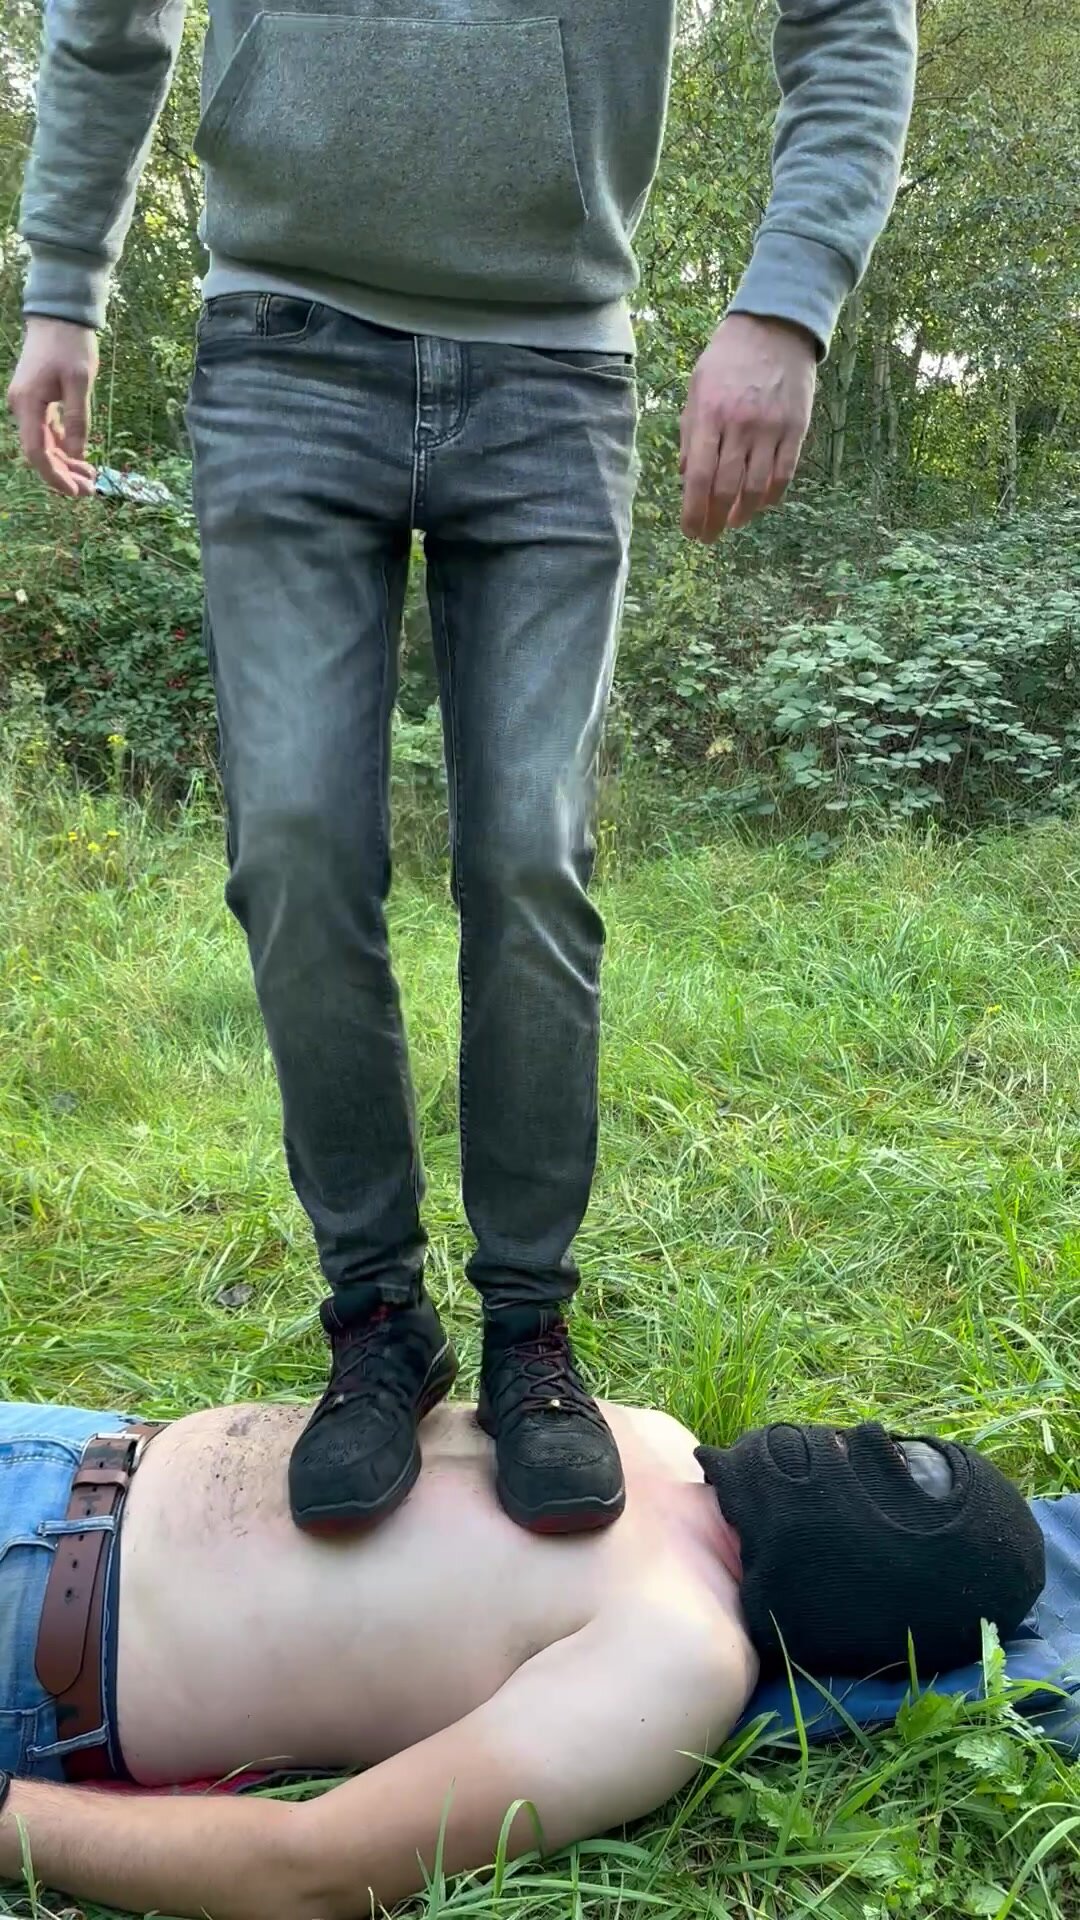 Trampling and jumping in dirty work boots